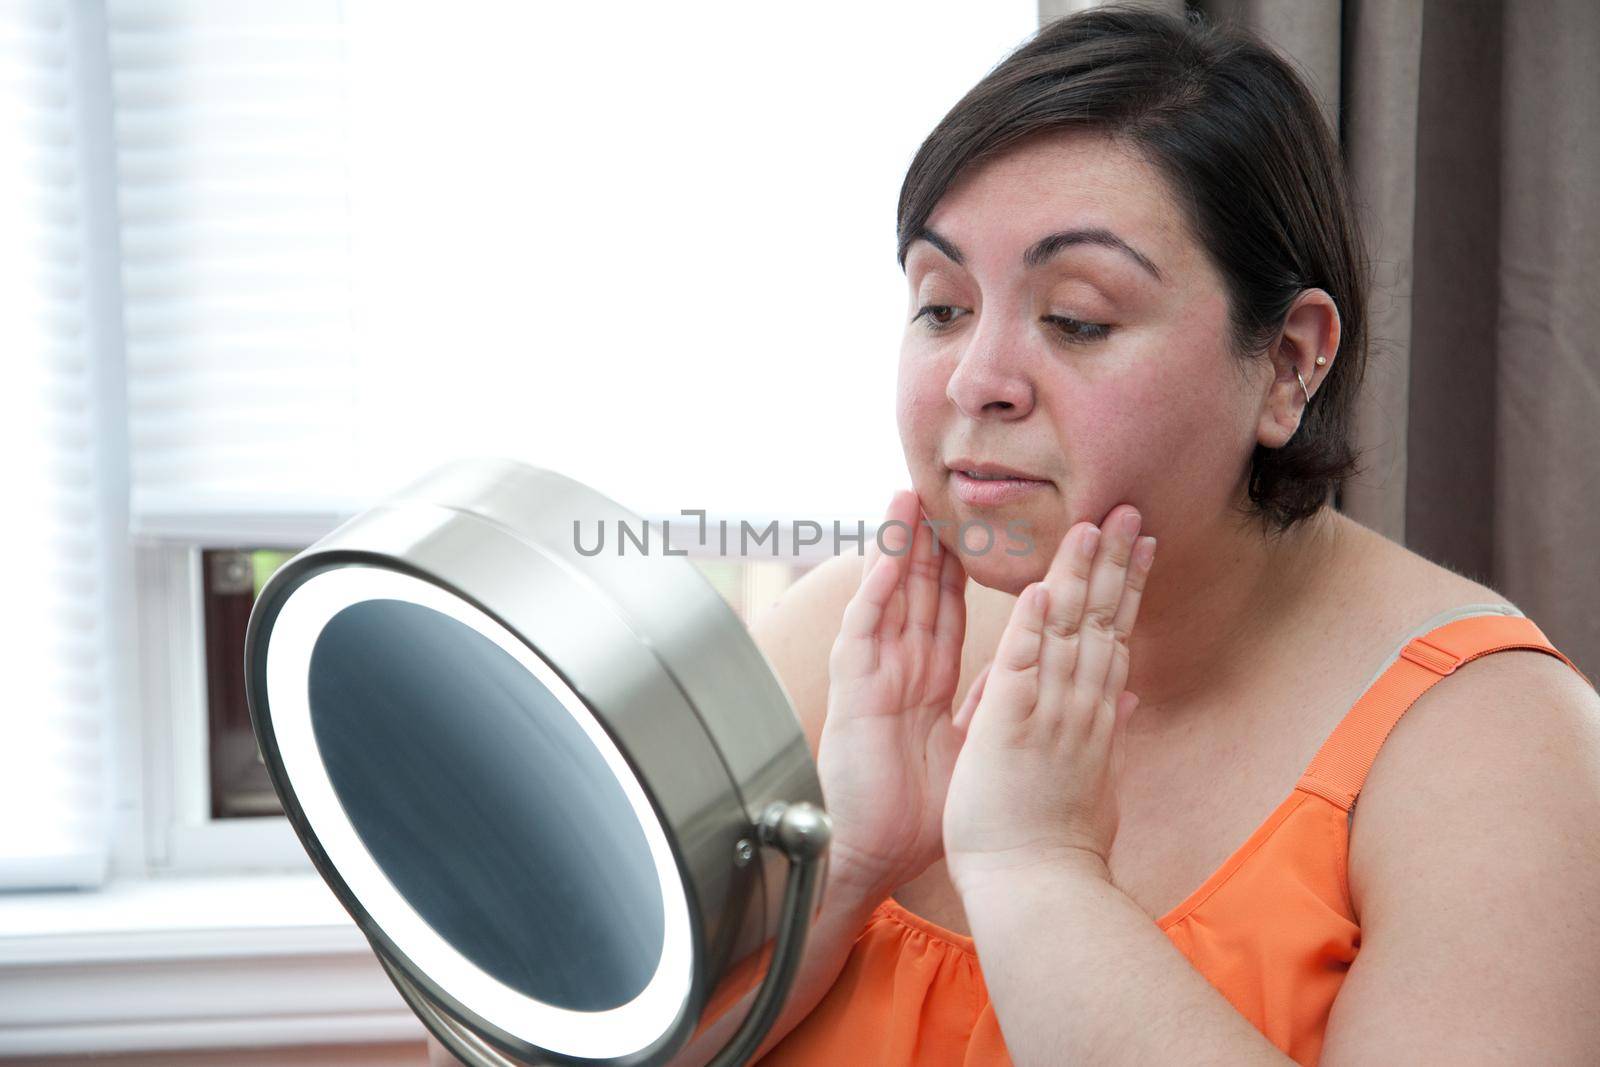 Sitting beside a window with a vanity mirror, a woman touches her face before applying makeup.